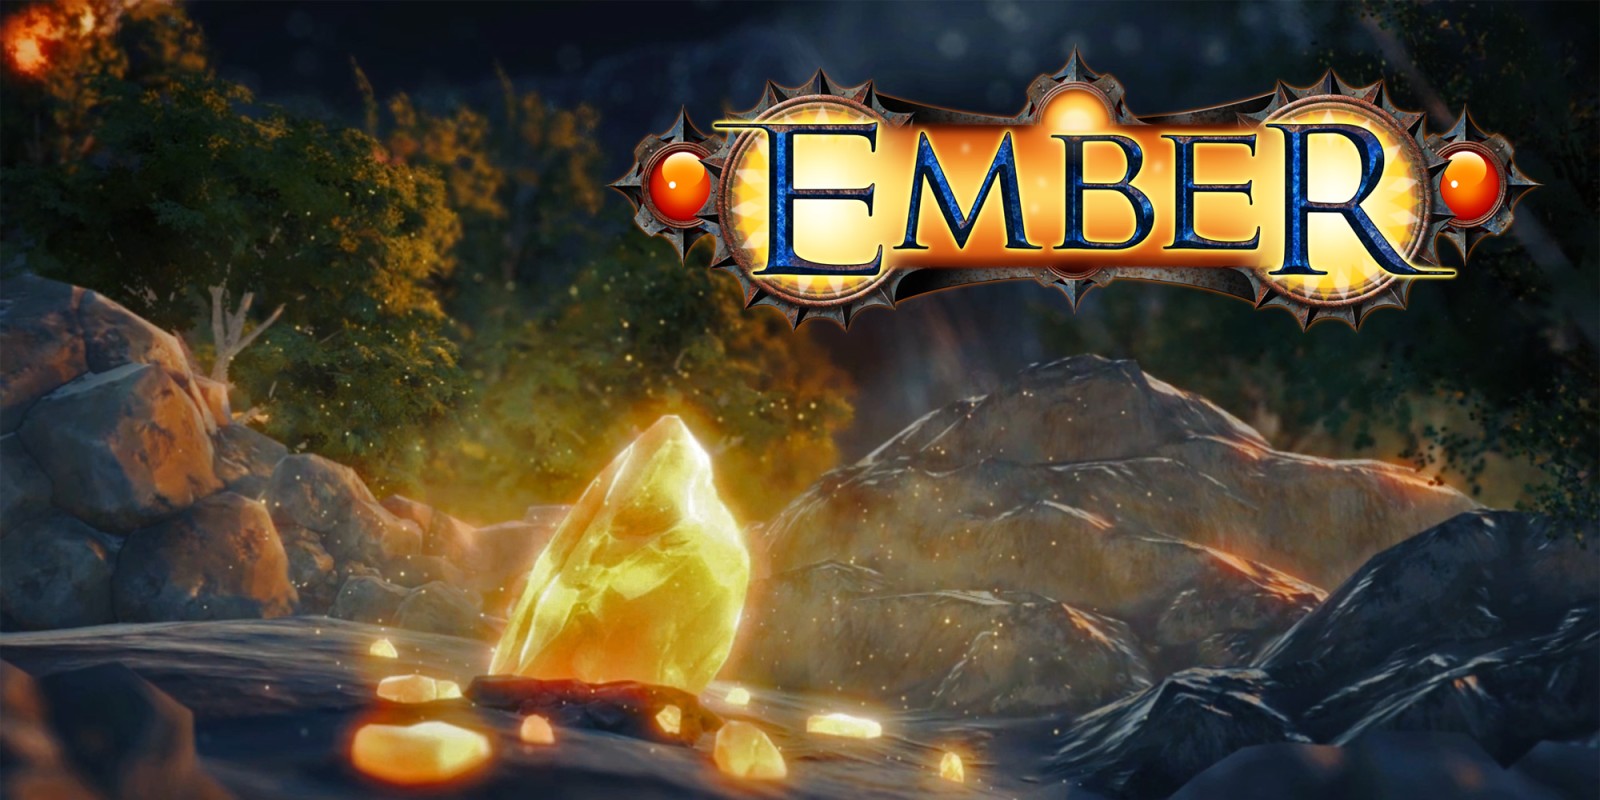 Empire of Ember download the new version for windows